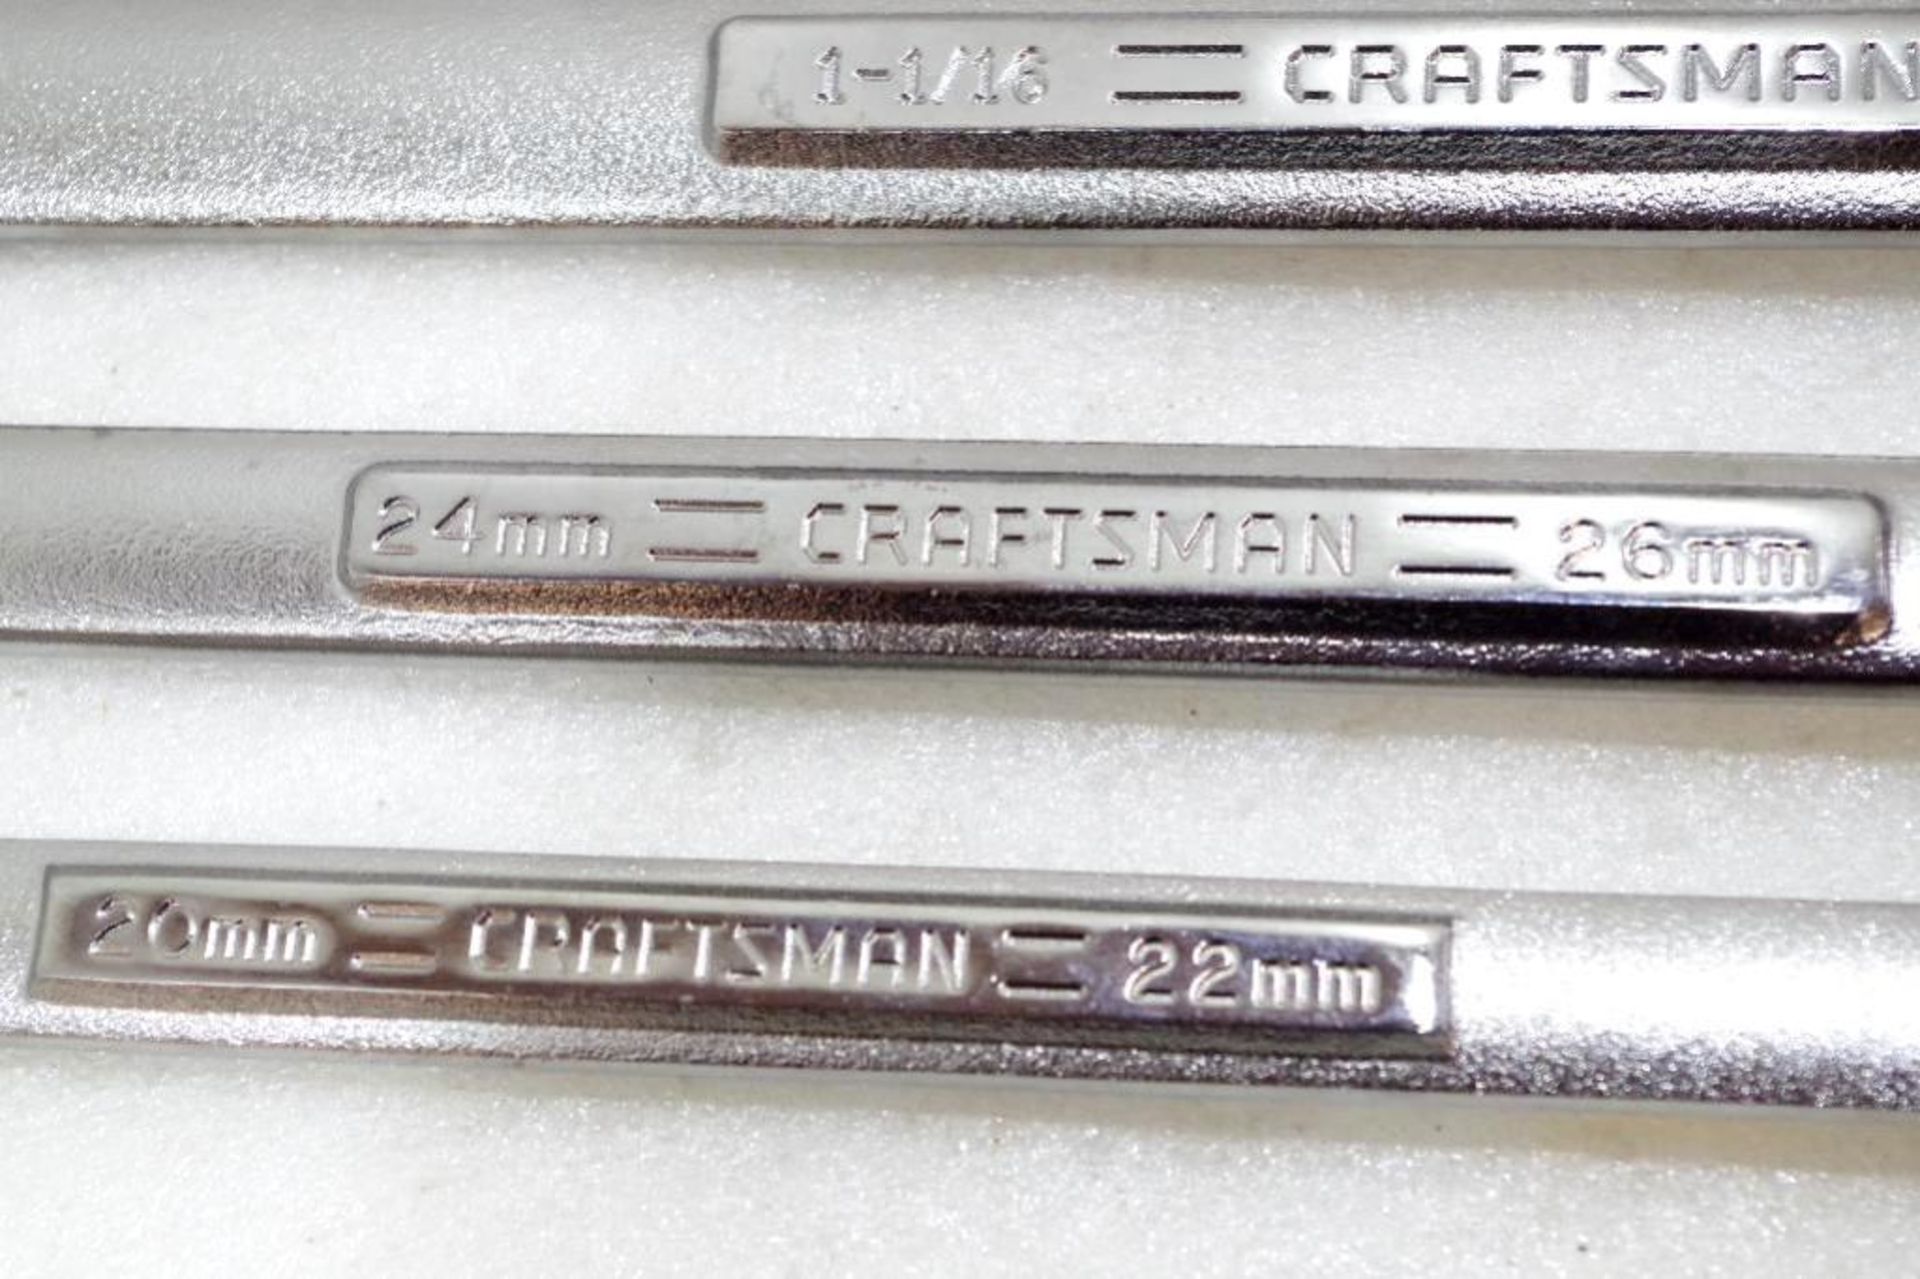 (4) NEW CRAFTSMAN Box-End Wrenches, Forged in USA - Image 3 of 4